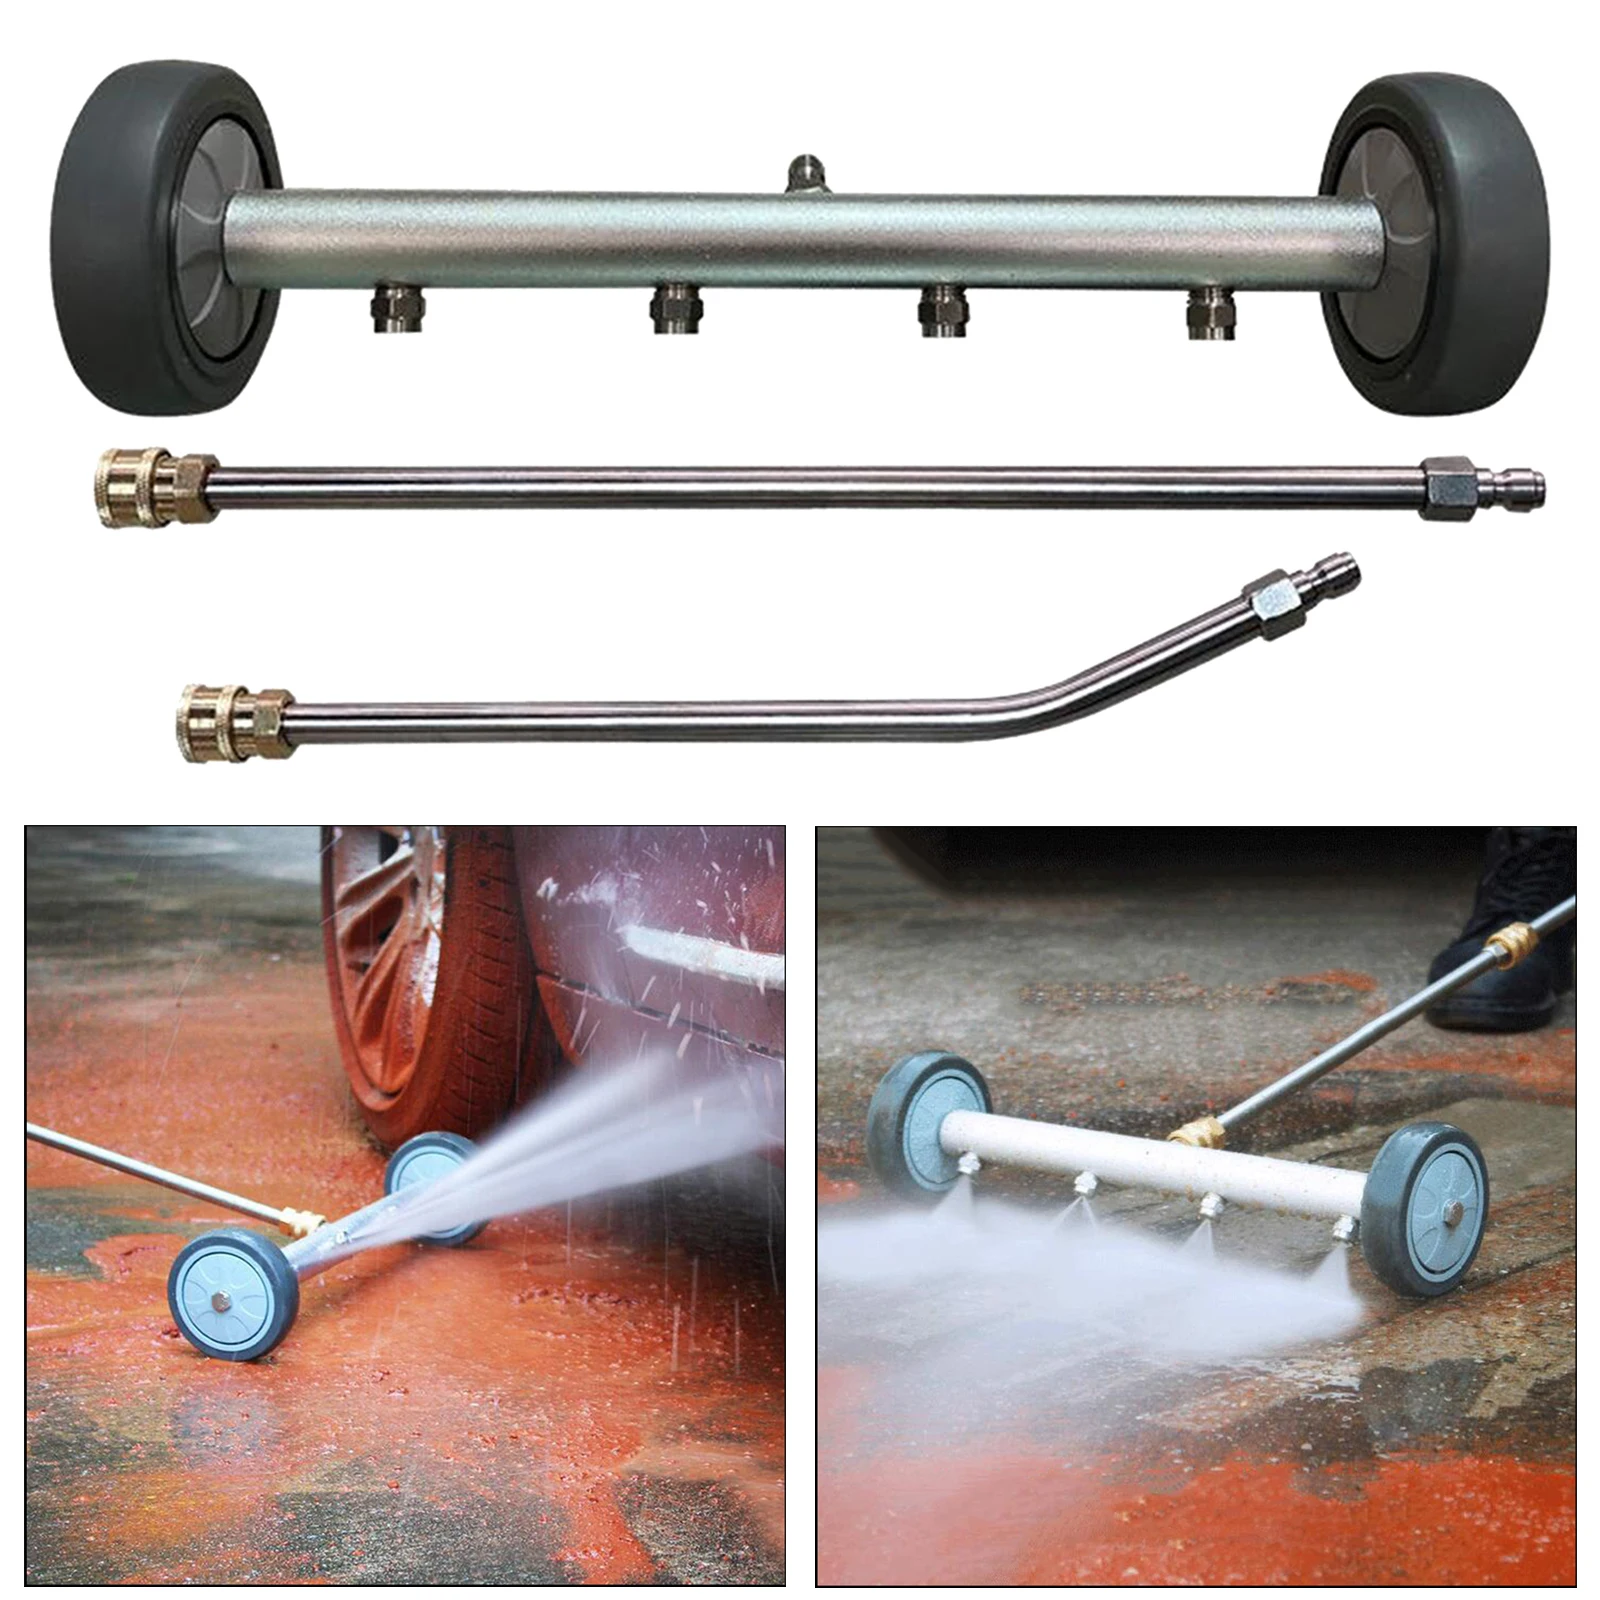 Undercarriage Cleaner Under Car Washing Water Brooms with Extension Rods for Pressure Washer